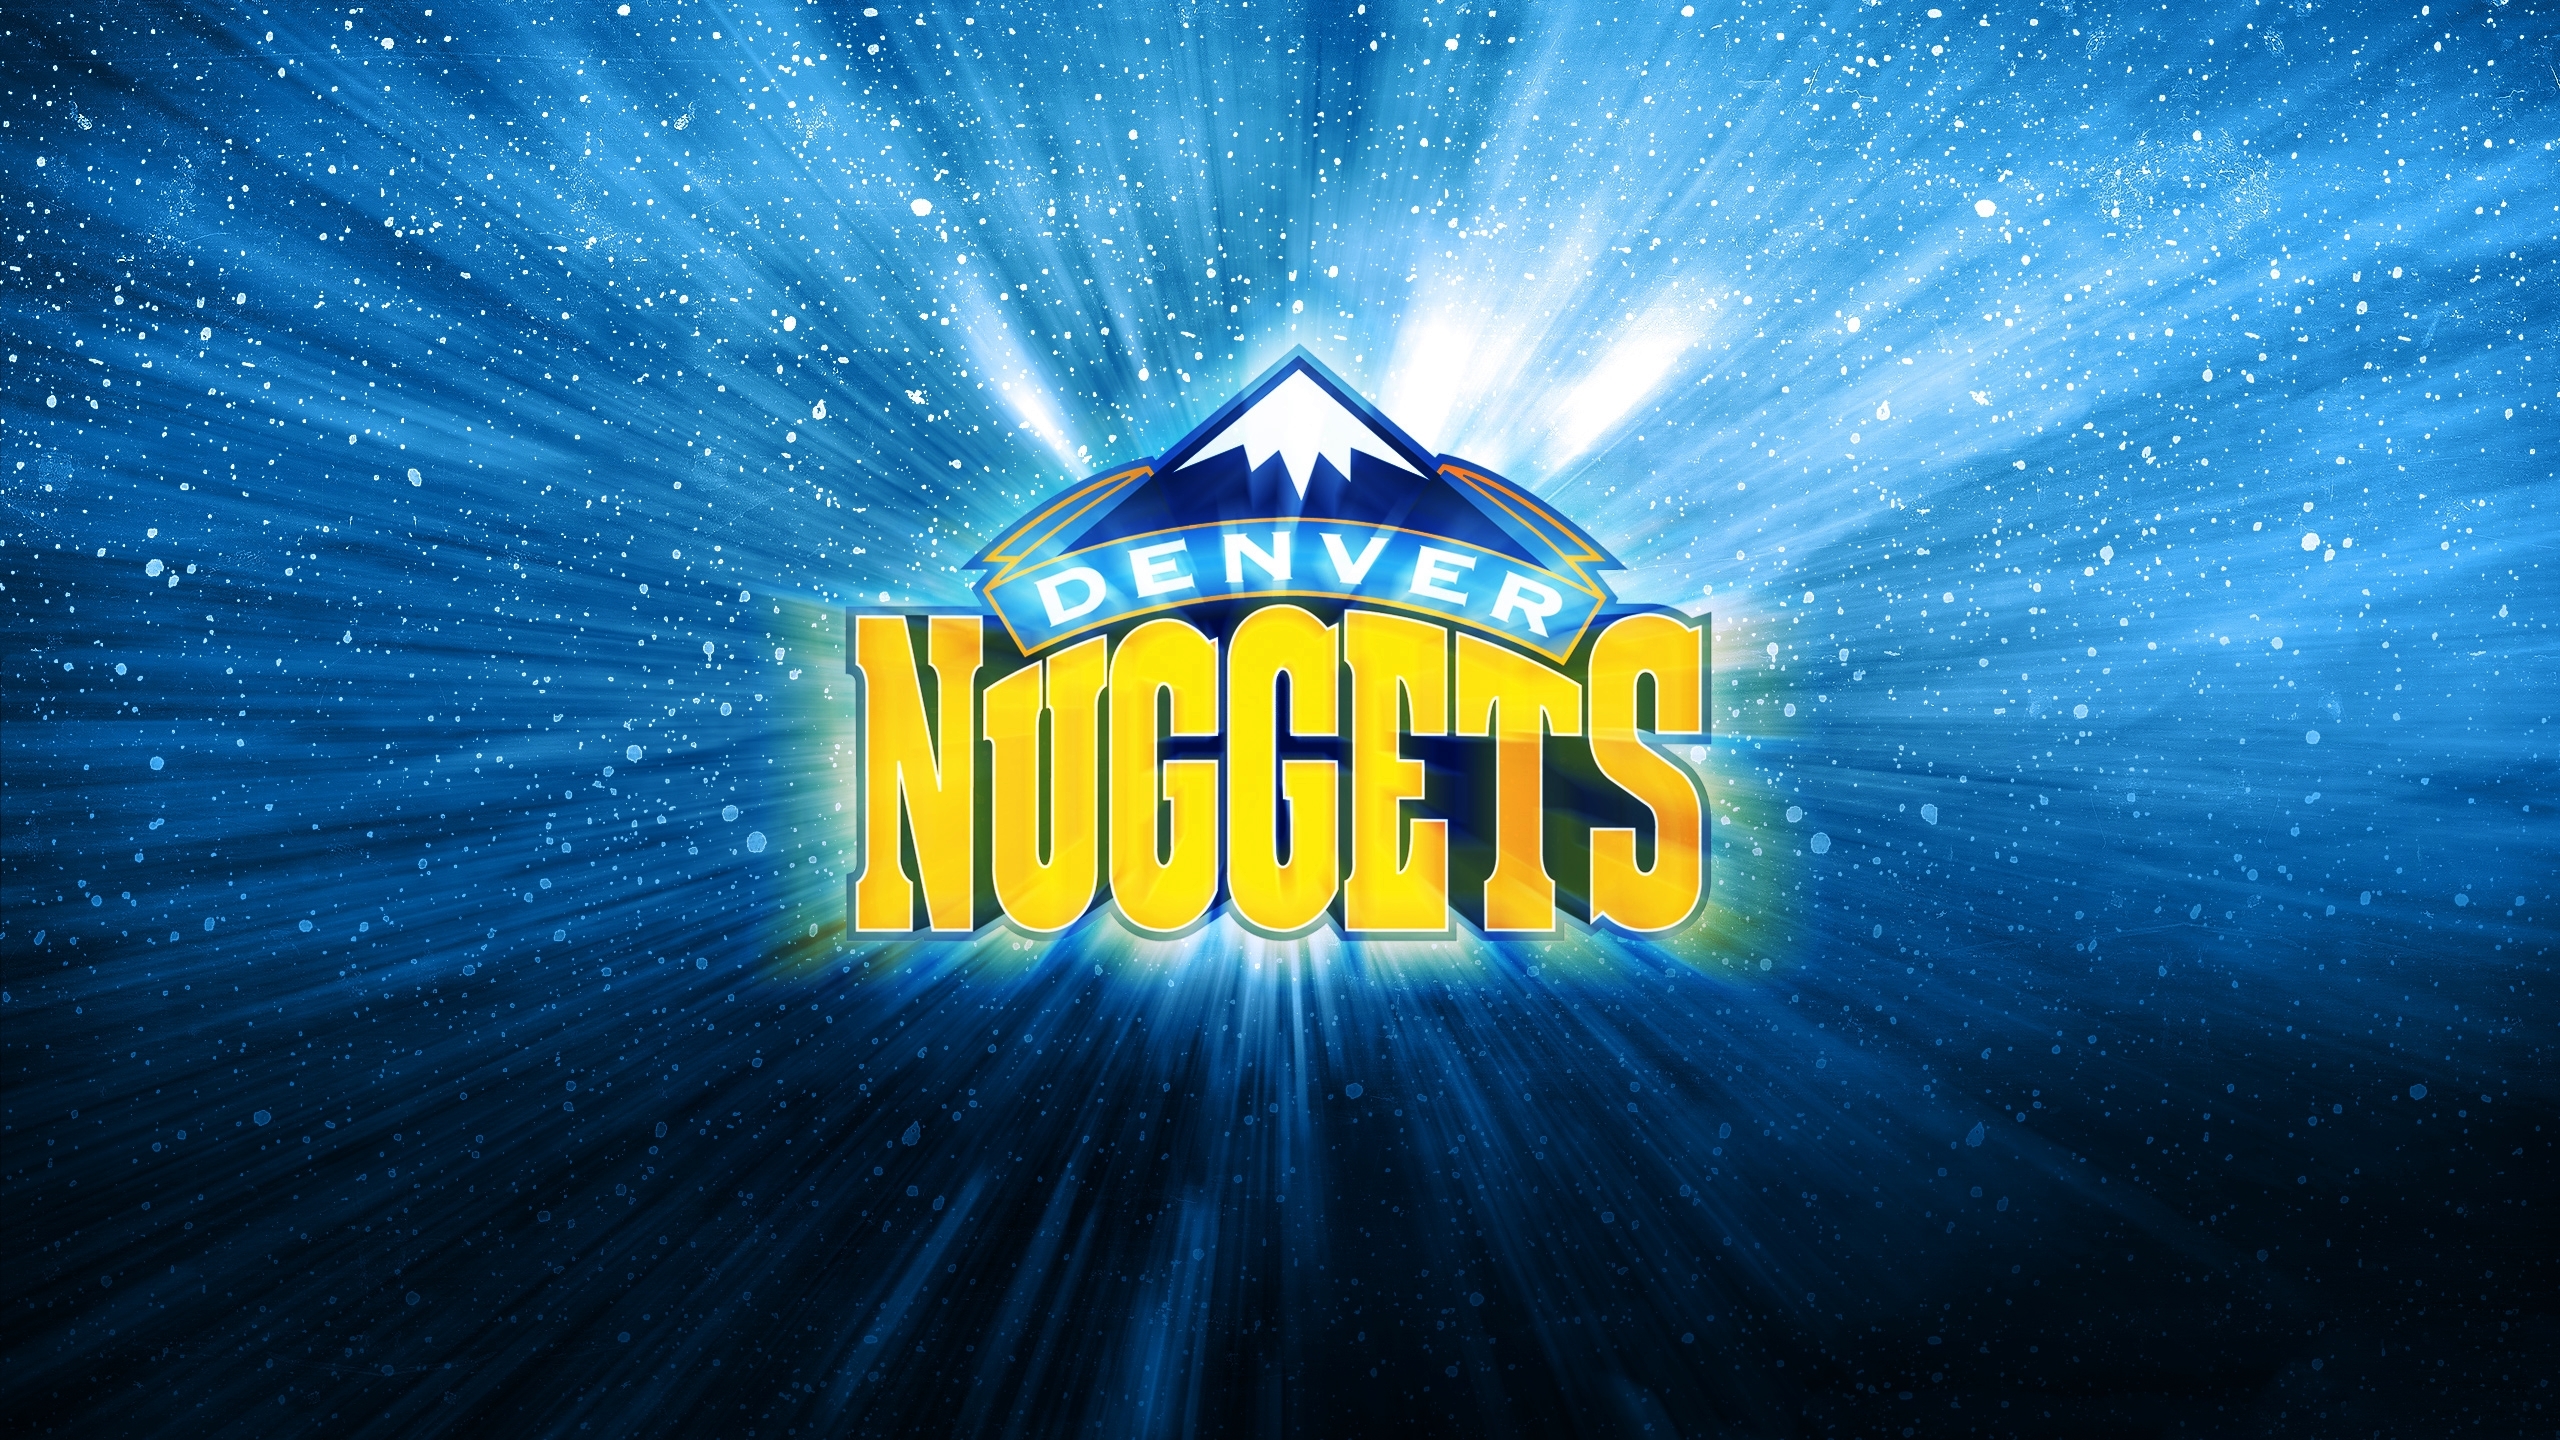 HoopsWallpaperscom  Get the latest HD and mobile NBA wallpapers today  Denver Nuggets Archives  HoopsWallpaperscom  Get the latest HD and  mobile NBA wallpapers today